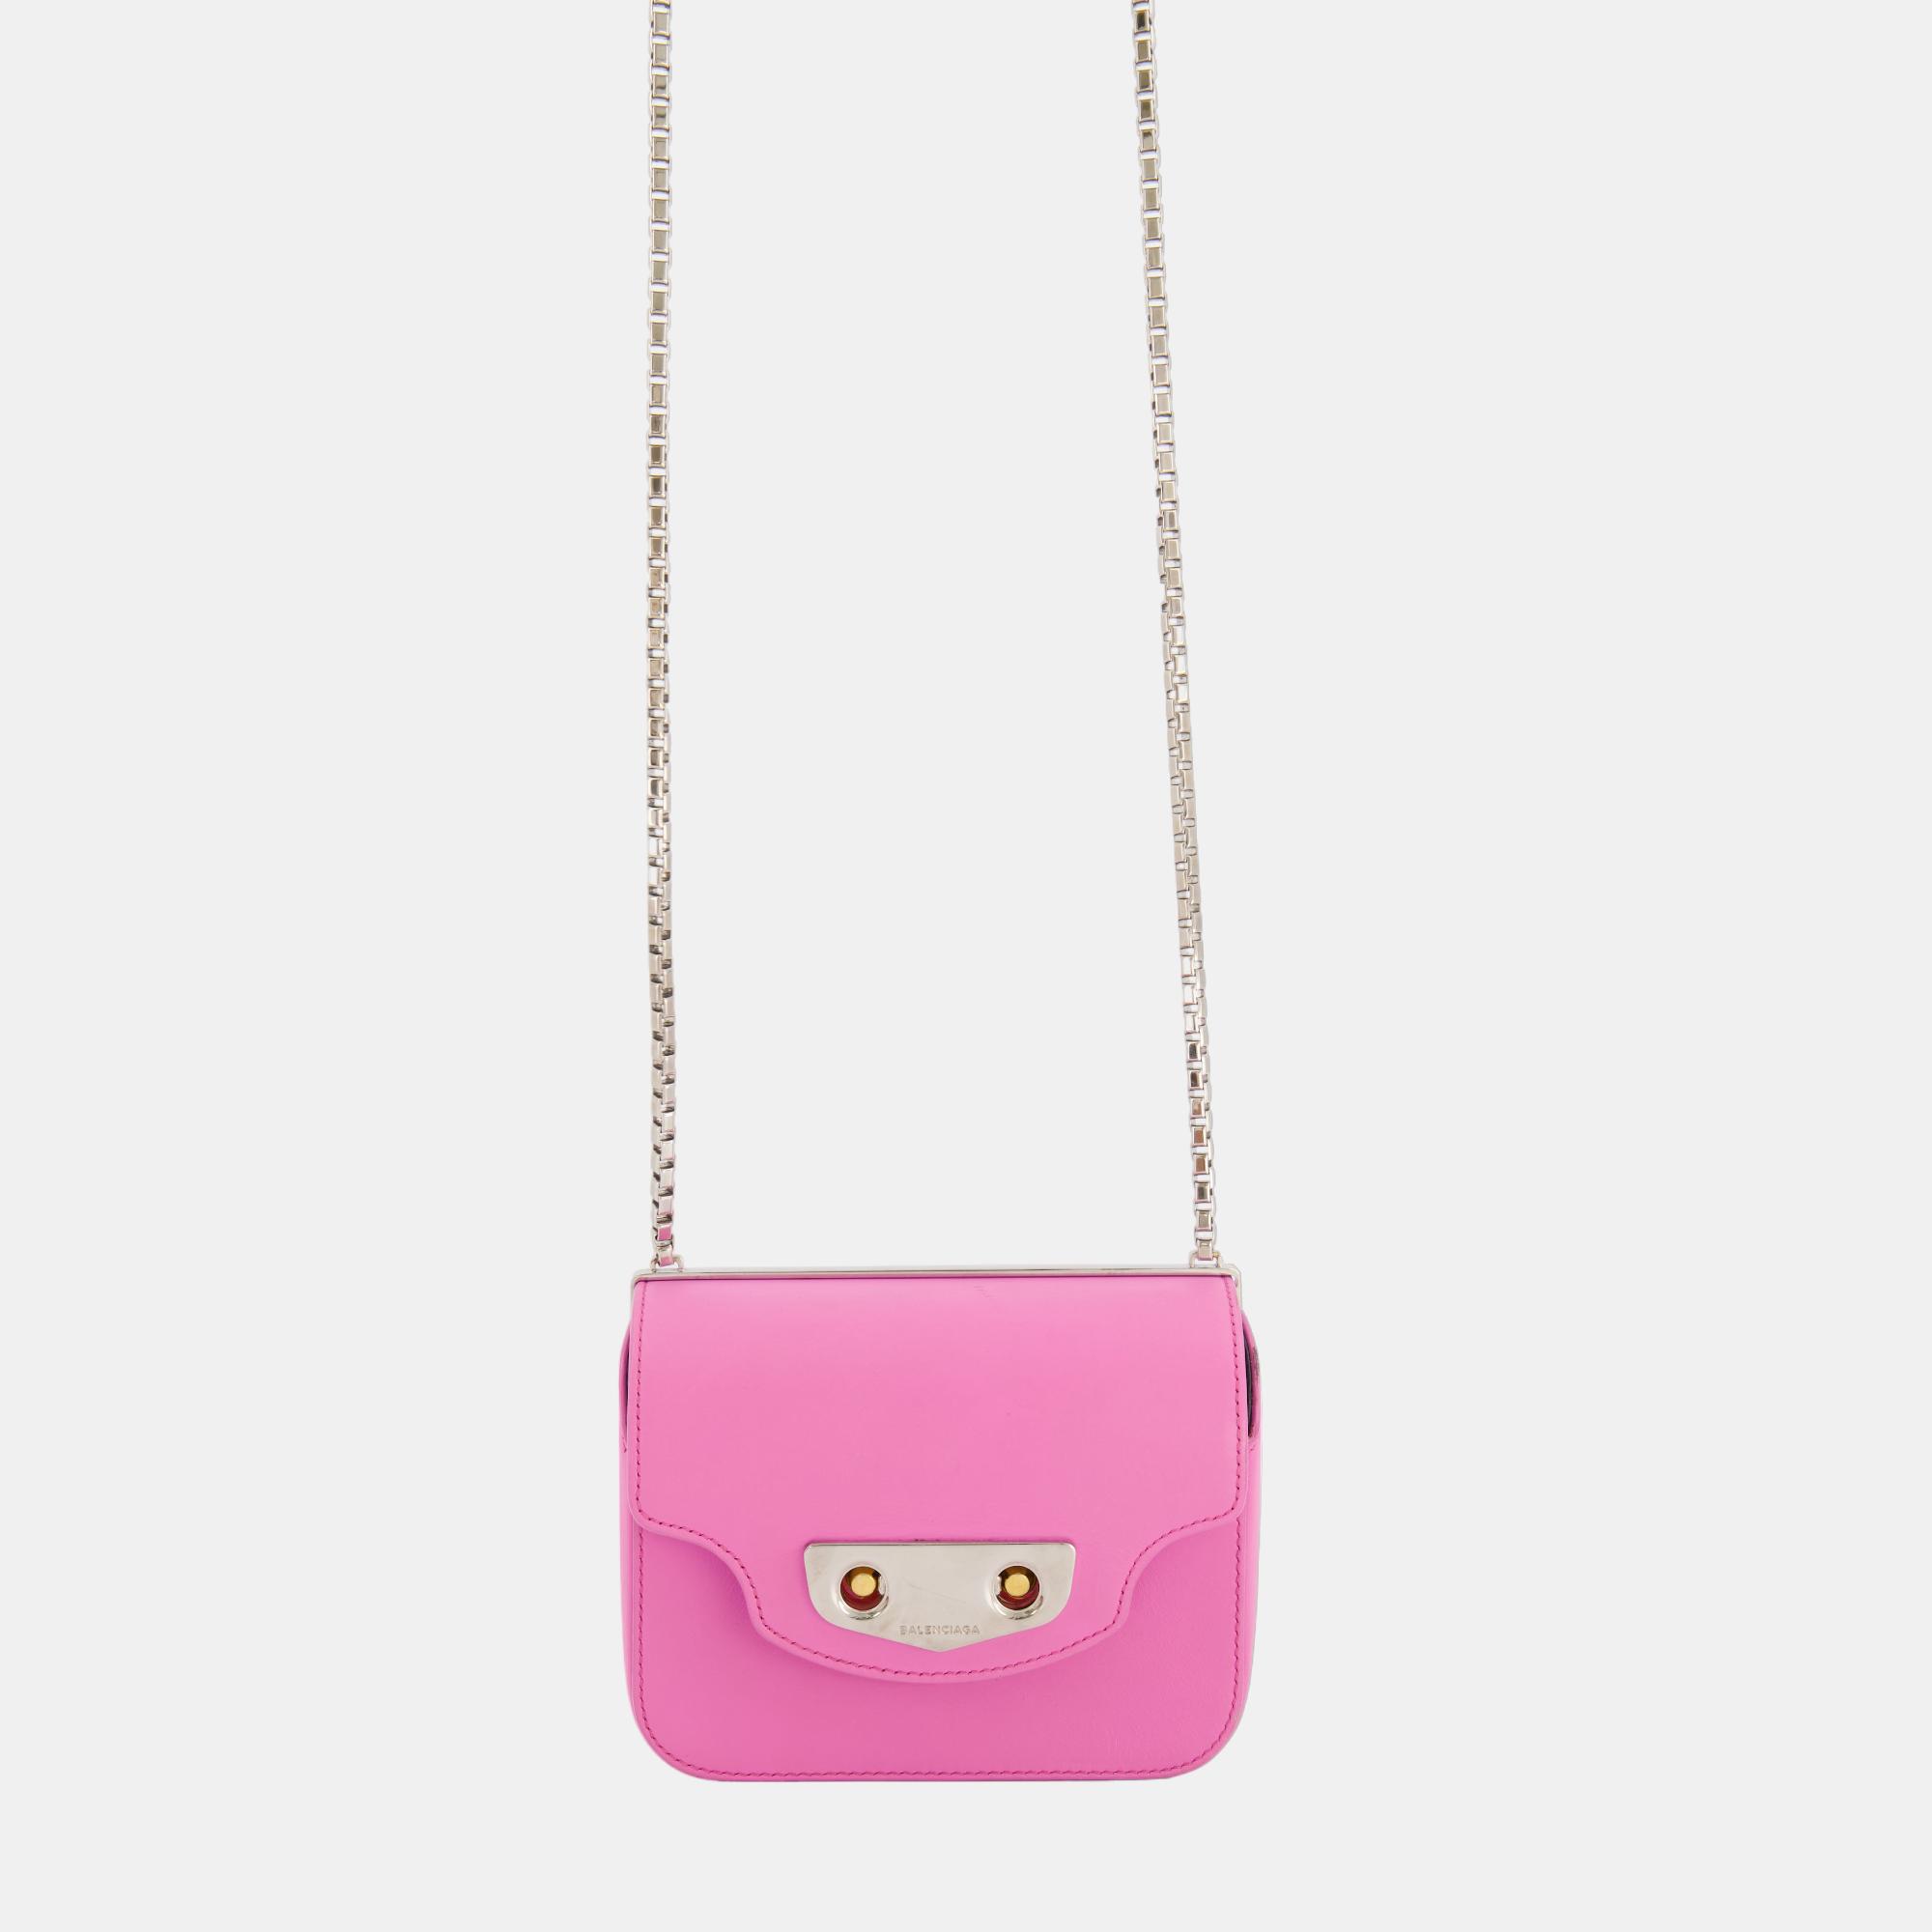 Balenciaga Candy Pink Small Leather Bag With Silver And Gold Hardware